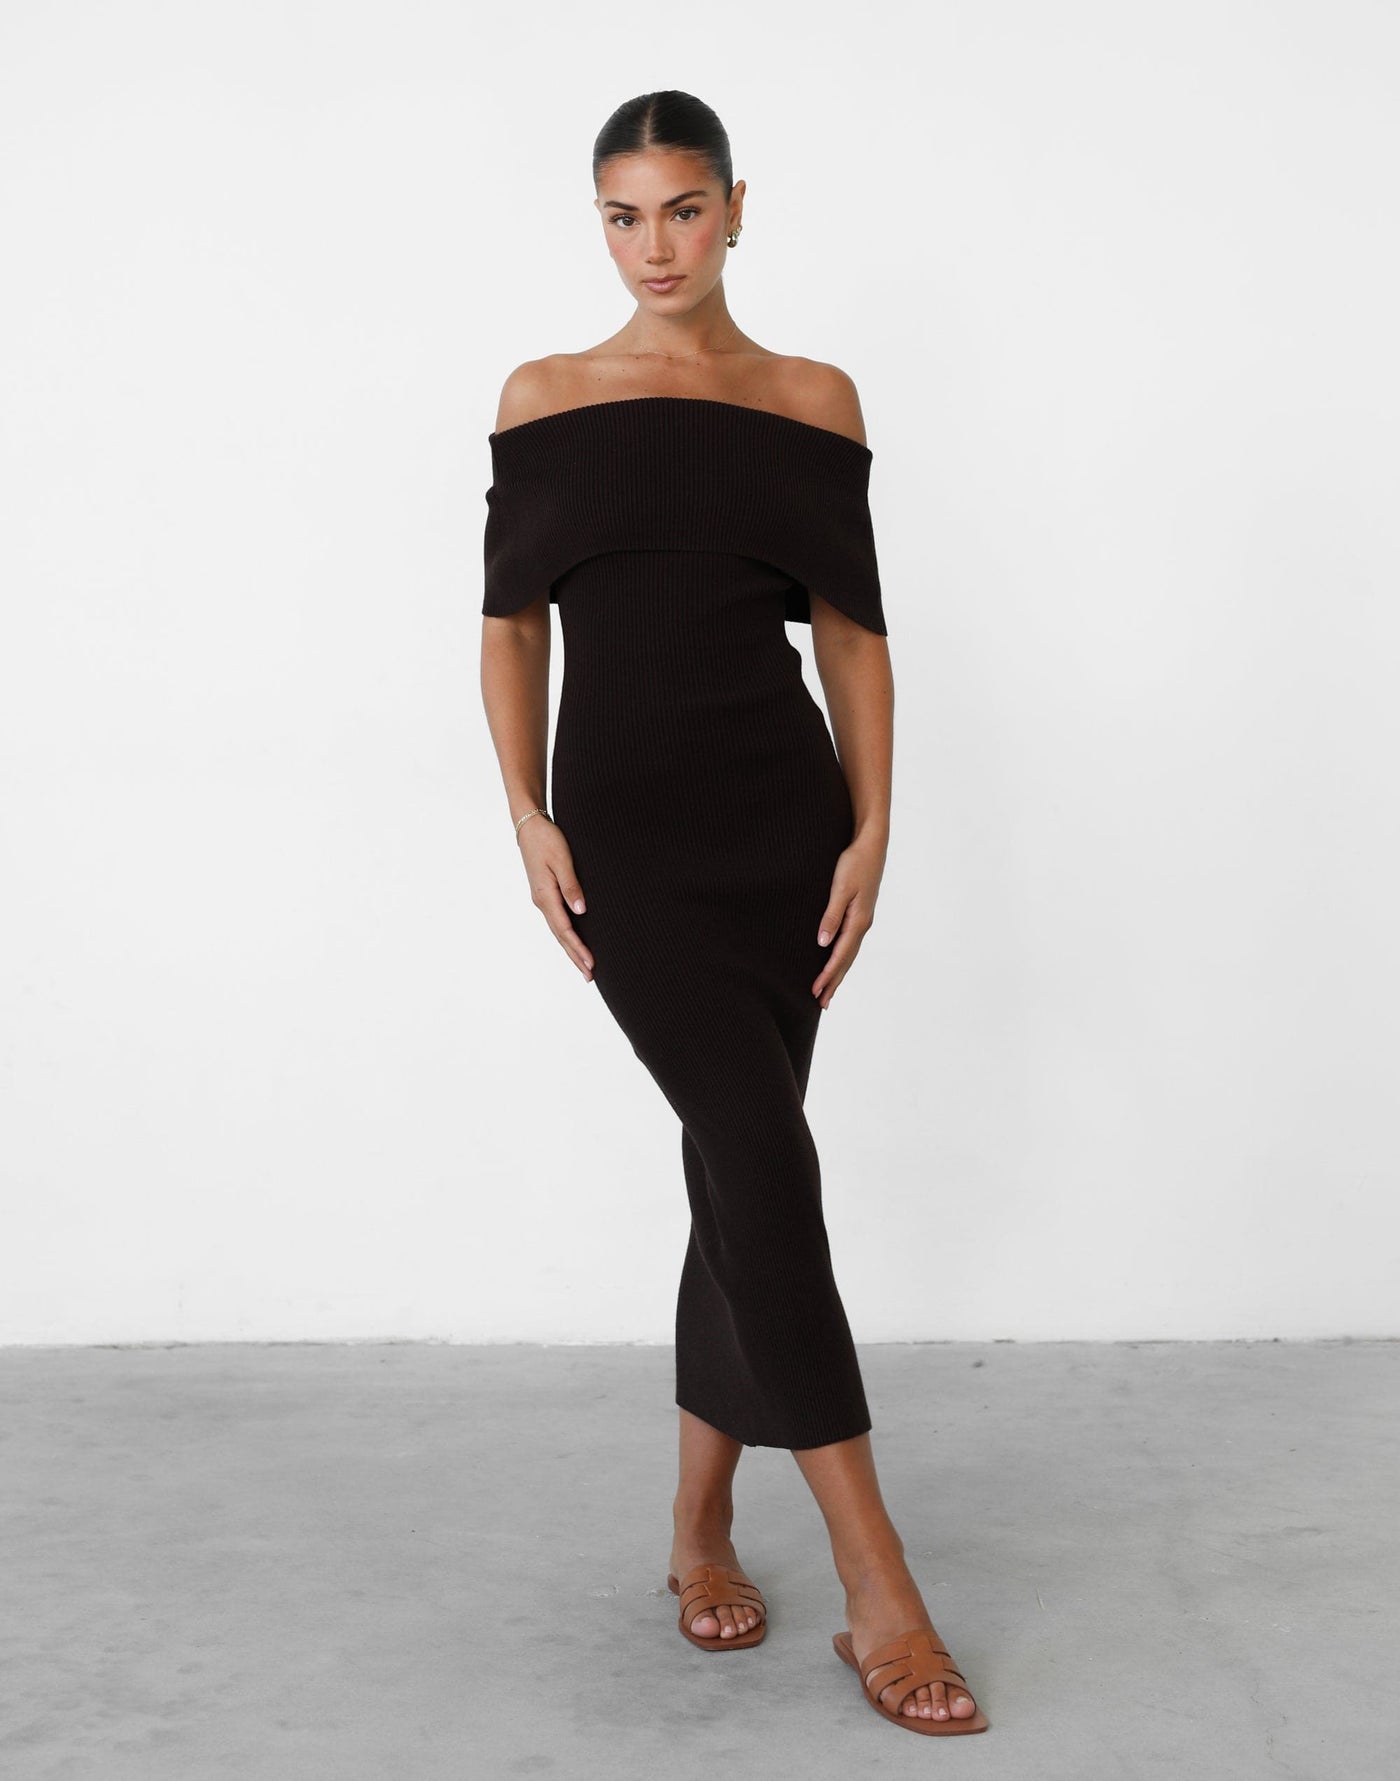 Ambiguity Maxi Dress (Chocolate) - Knit Off Shoulder Fold Over Maxi Dress - Women's Top - Charcoal Clothing